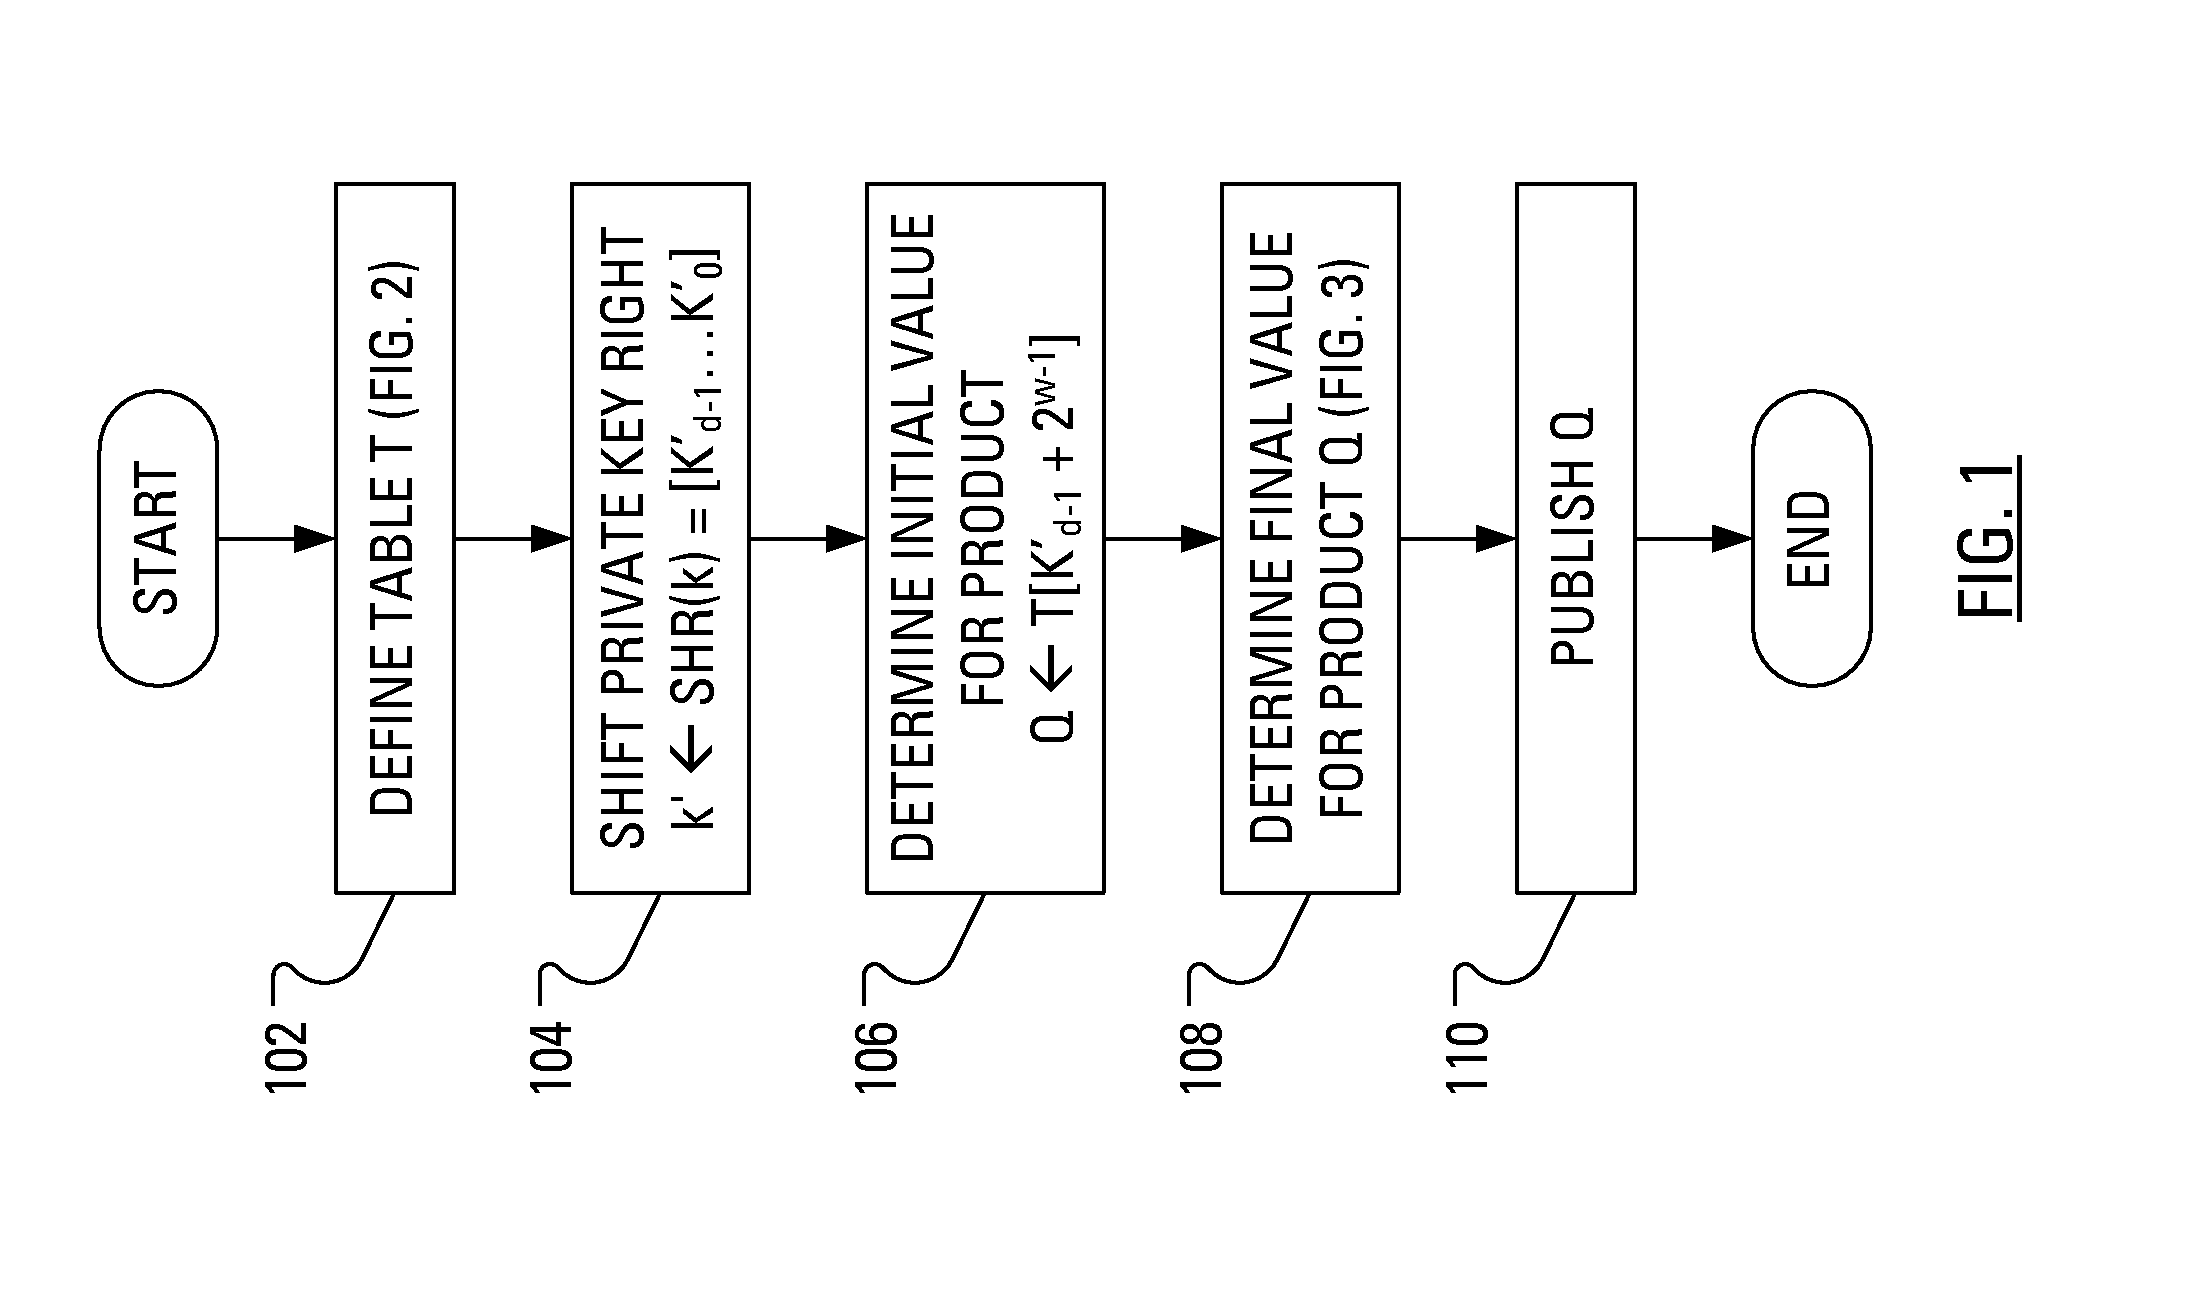 Method and Apparatus for Generating a Public Key in a Manner That Counters Power Analysis Attacks